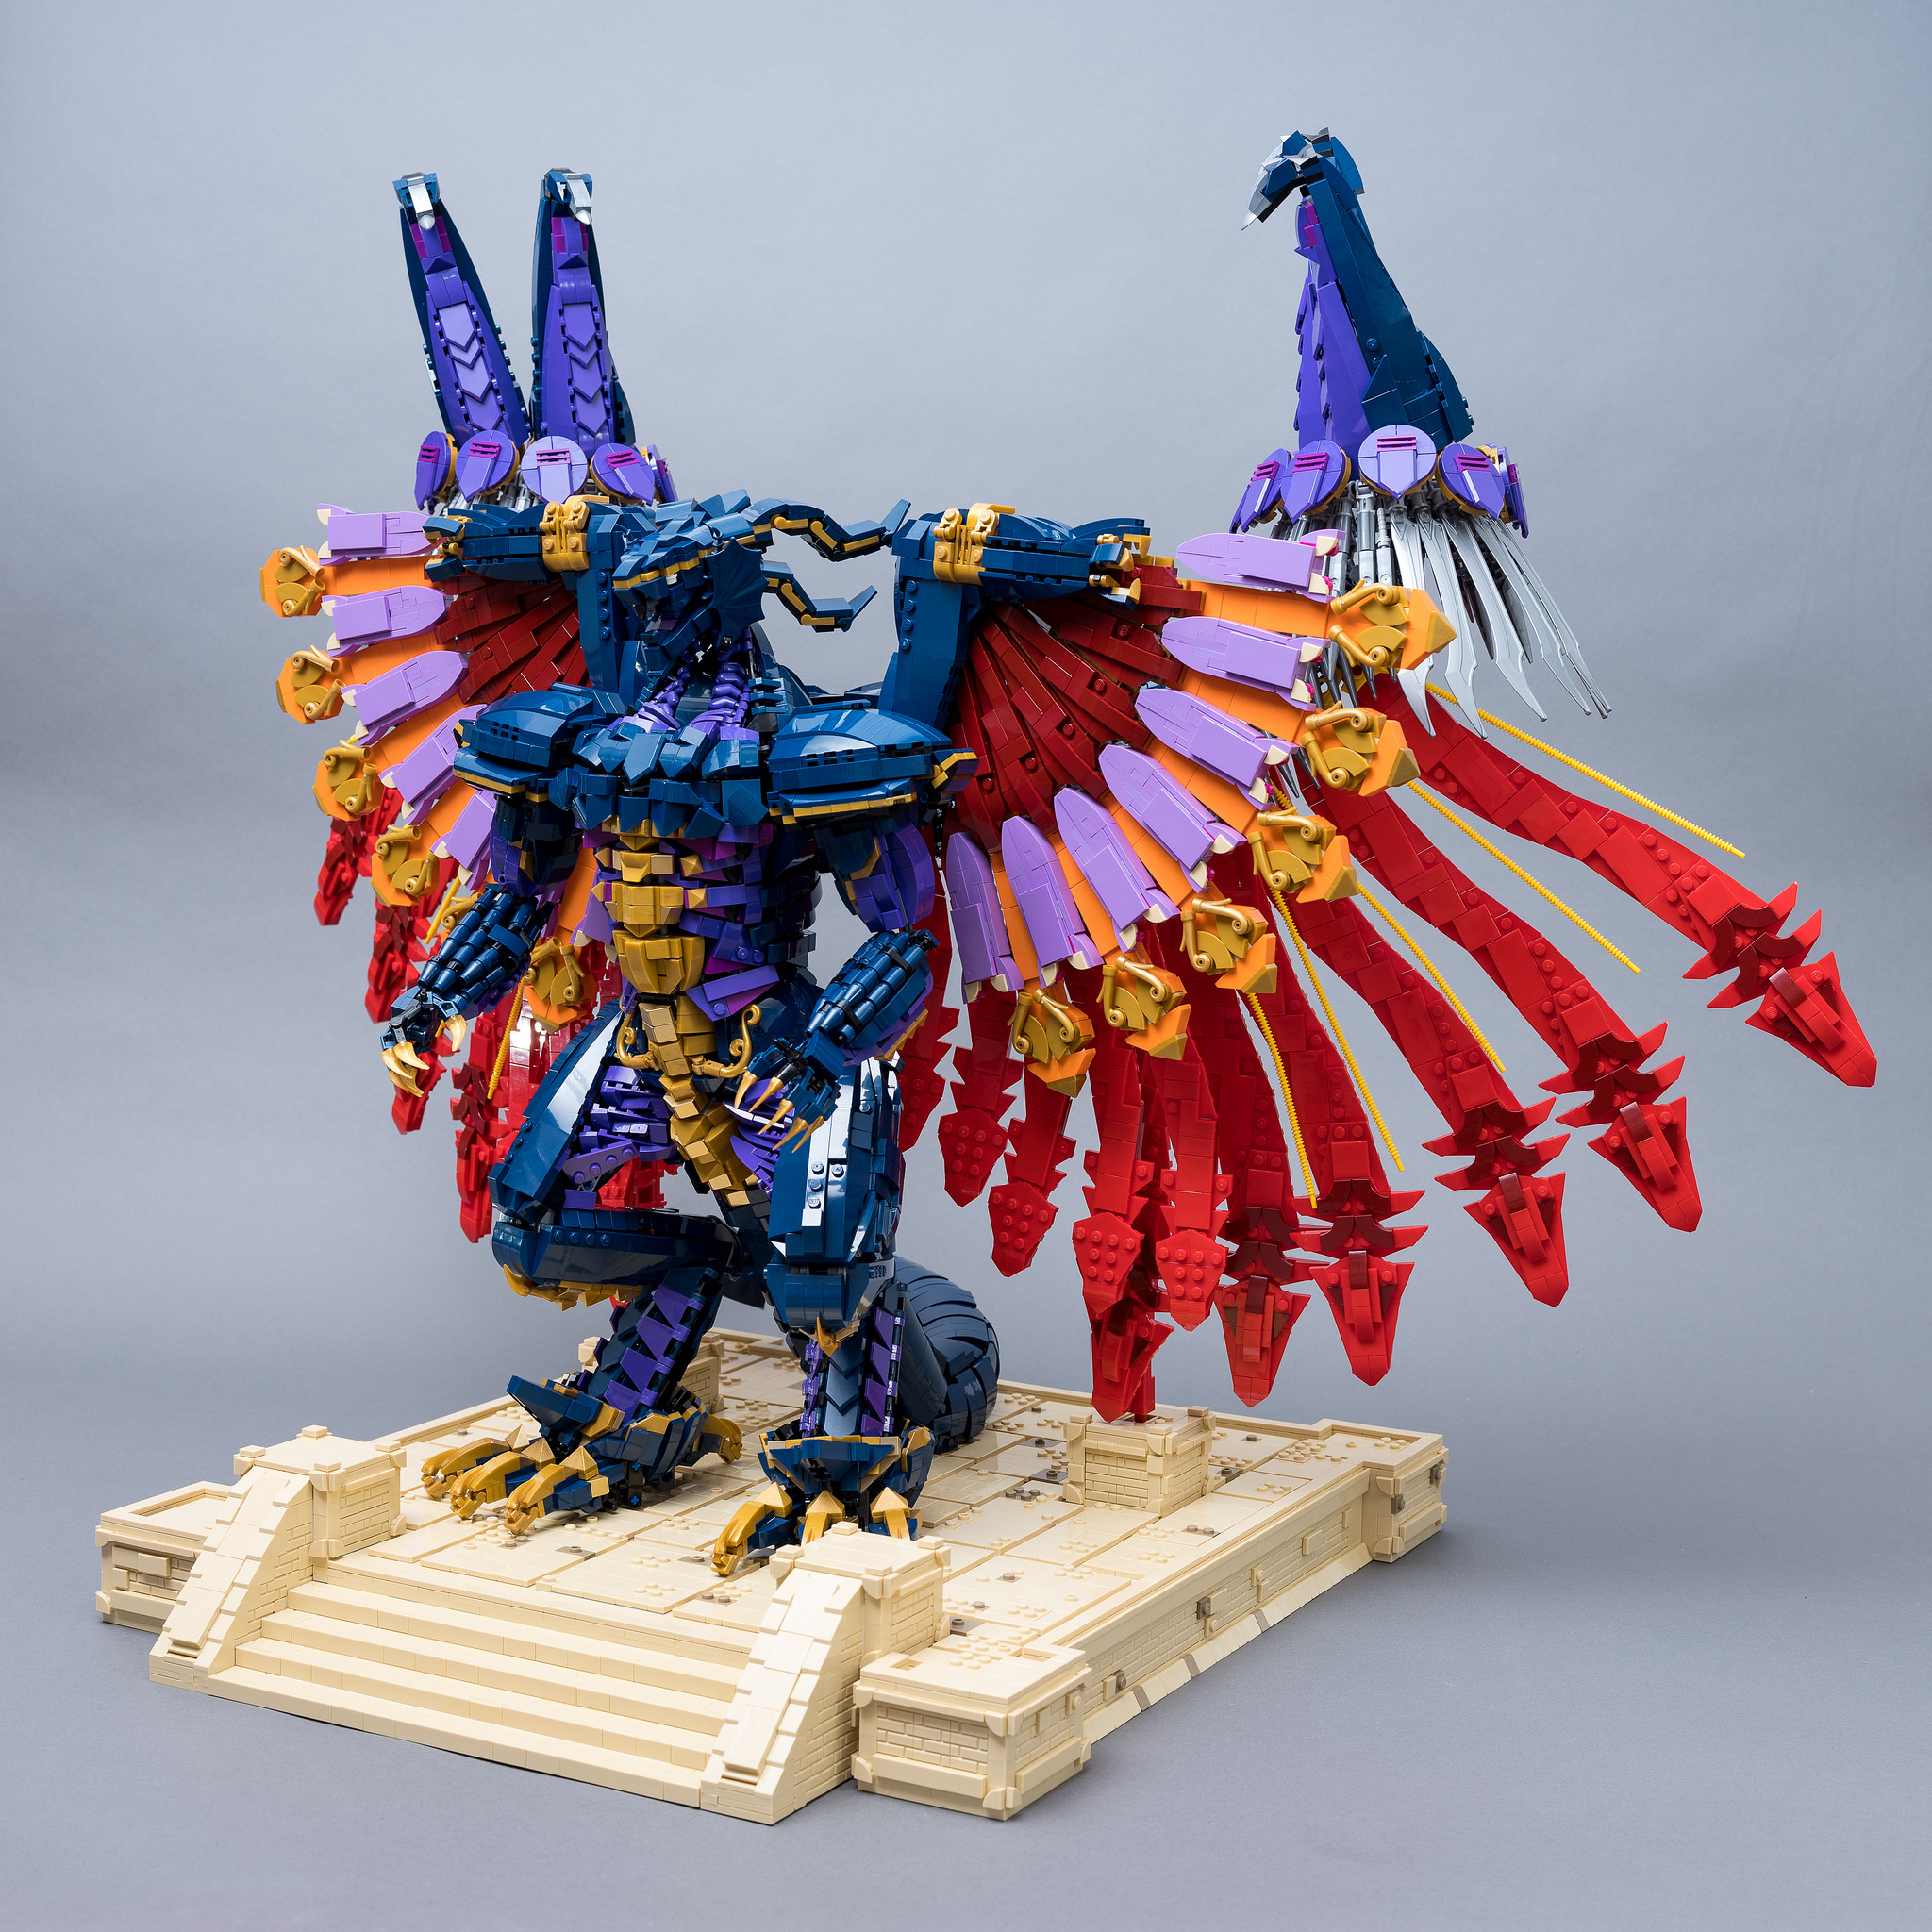 LEGO Final Fantasy Build Used Over 10,000 Pieces